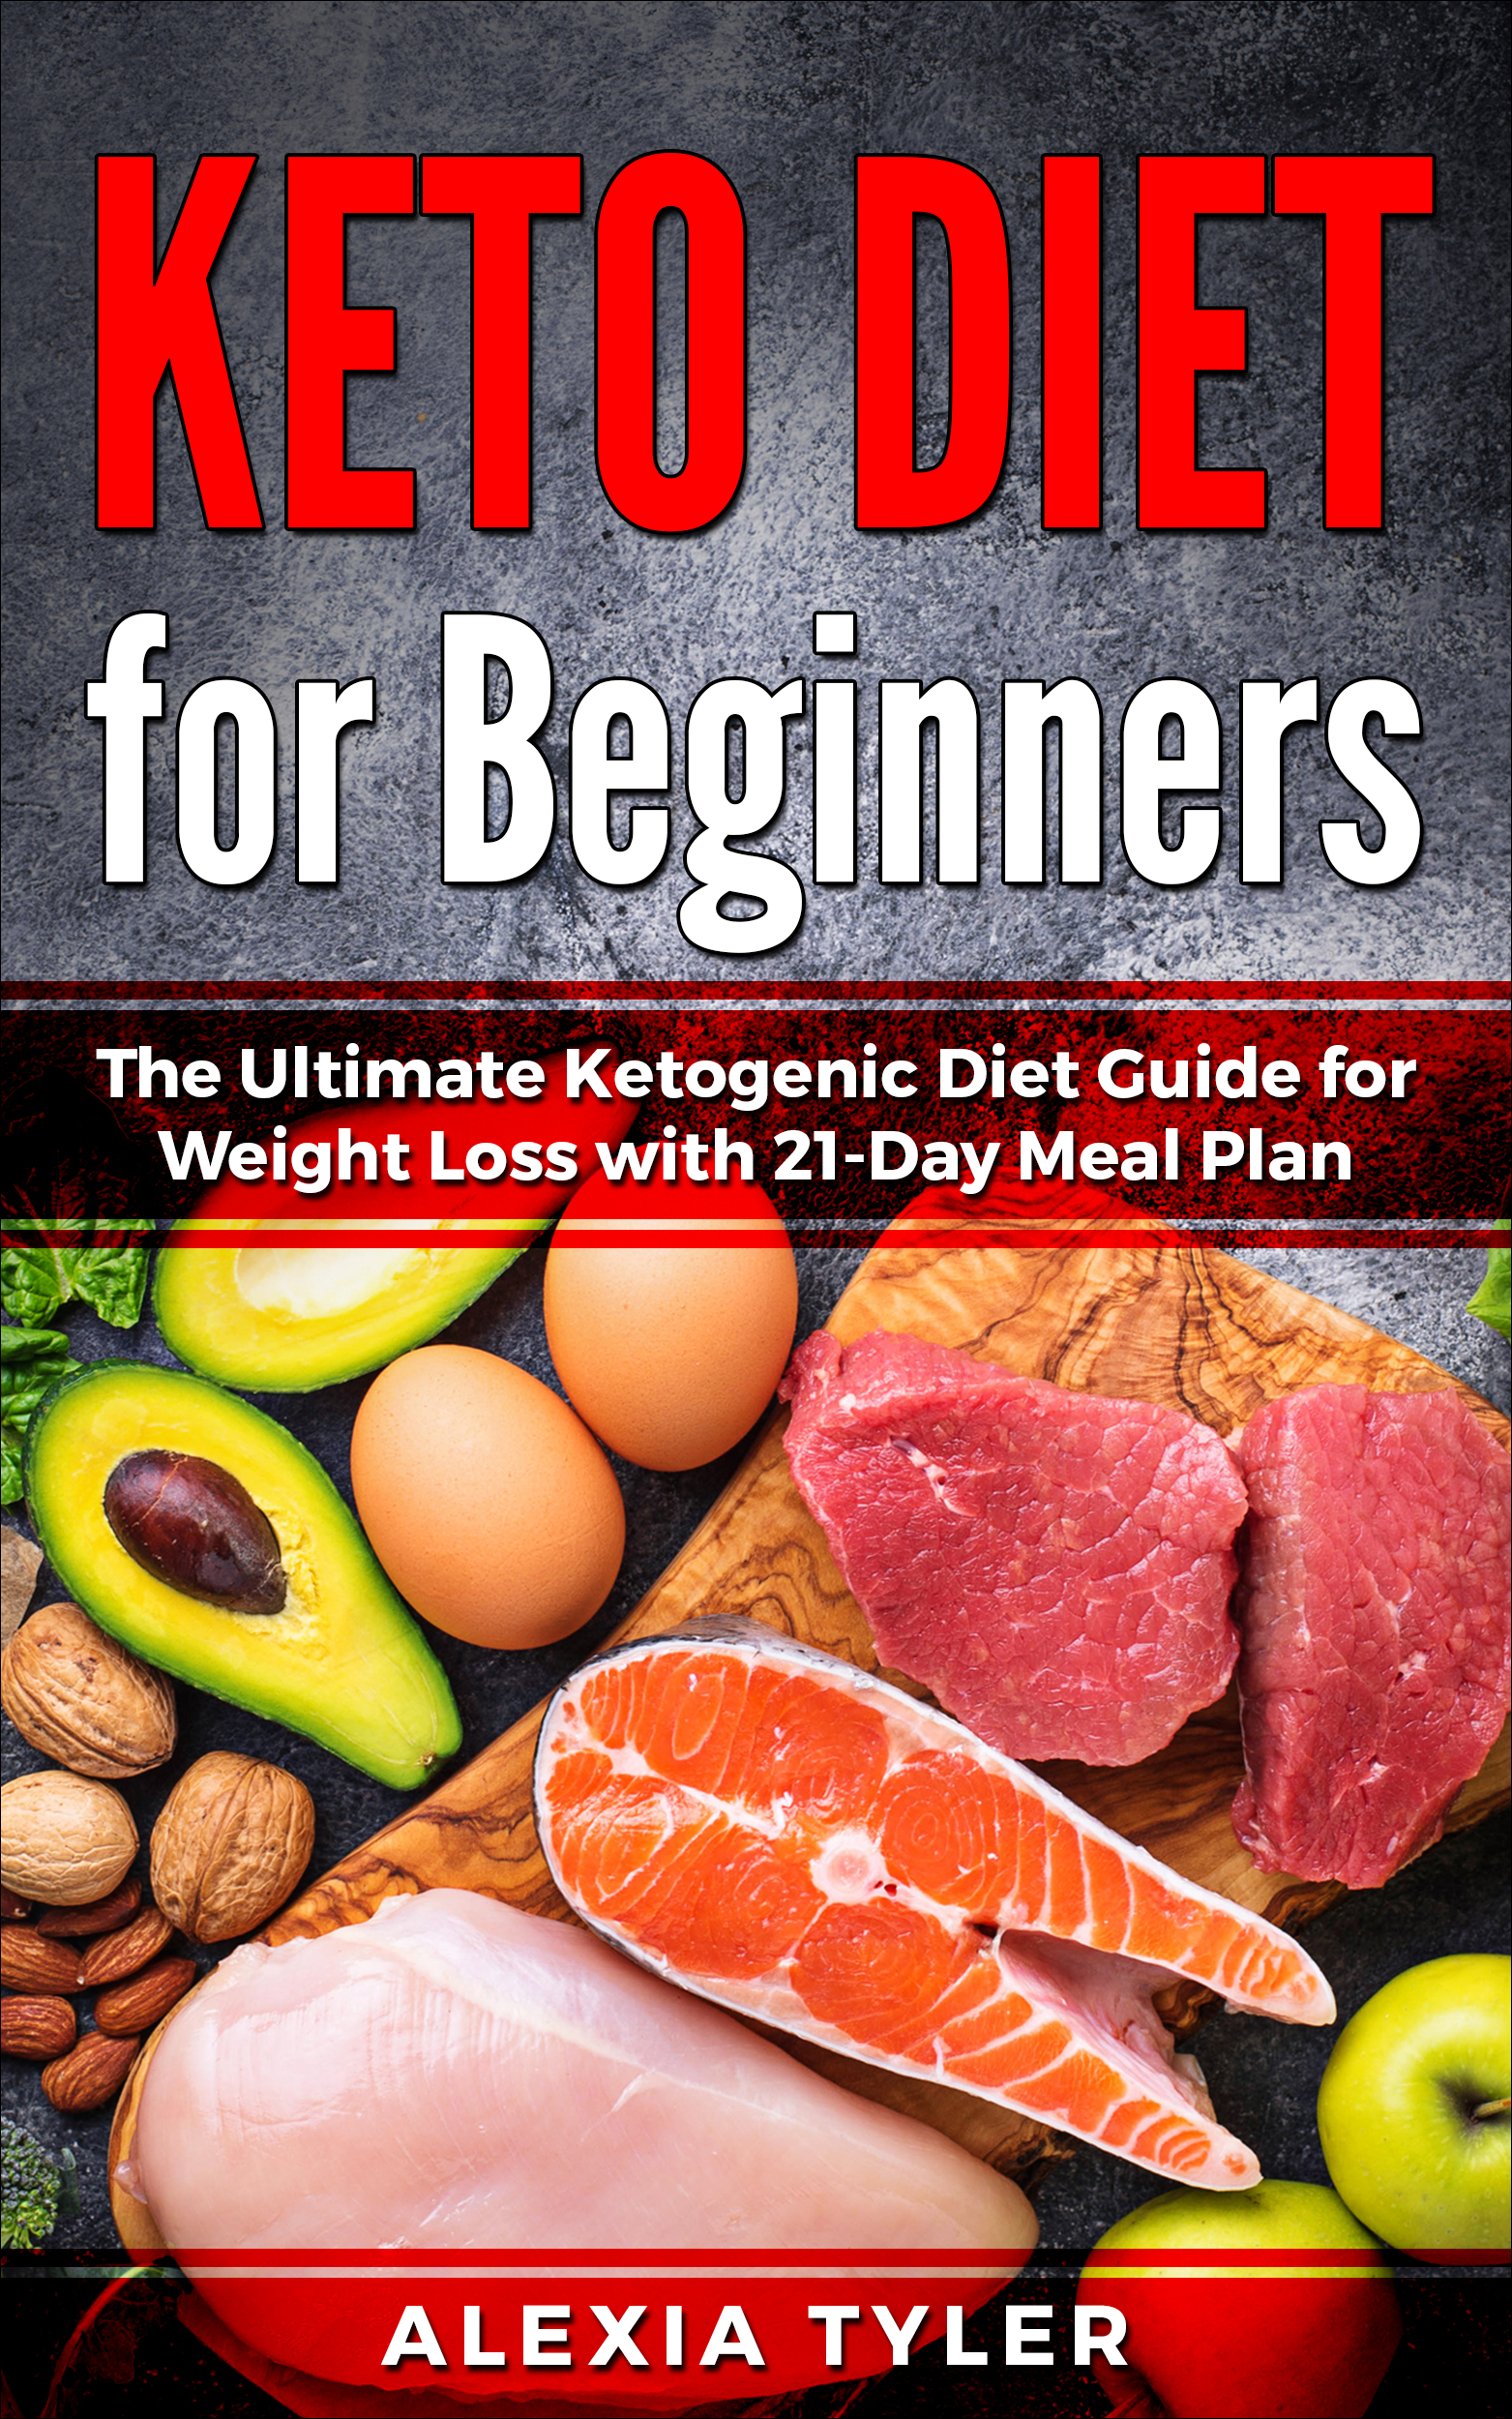 FREE: Keto Diet for Beginners: The Ultimate Ketogenic Diet Guide for Weight Loss with 21-Day Meal Plan by Alexia Tyler